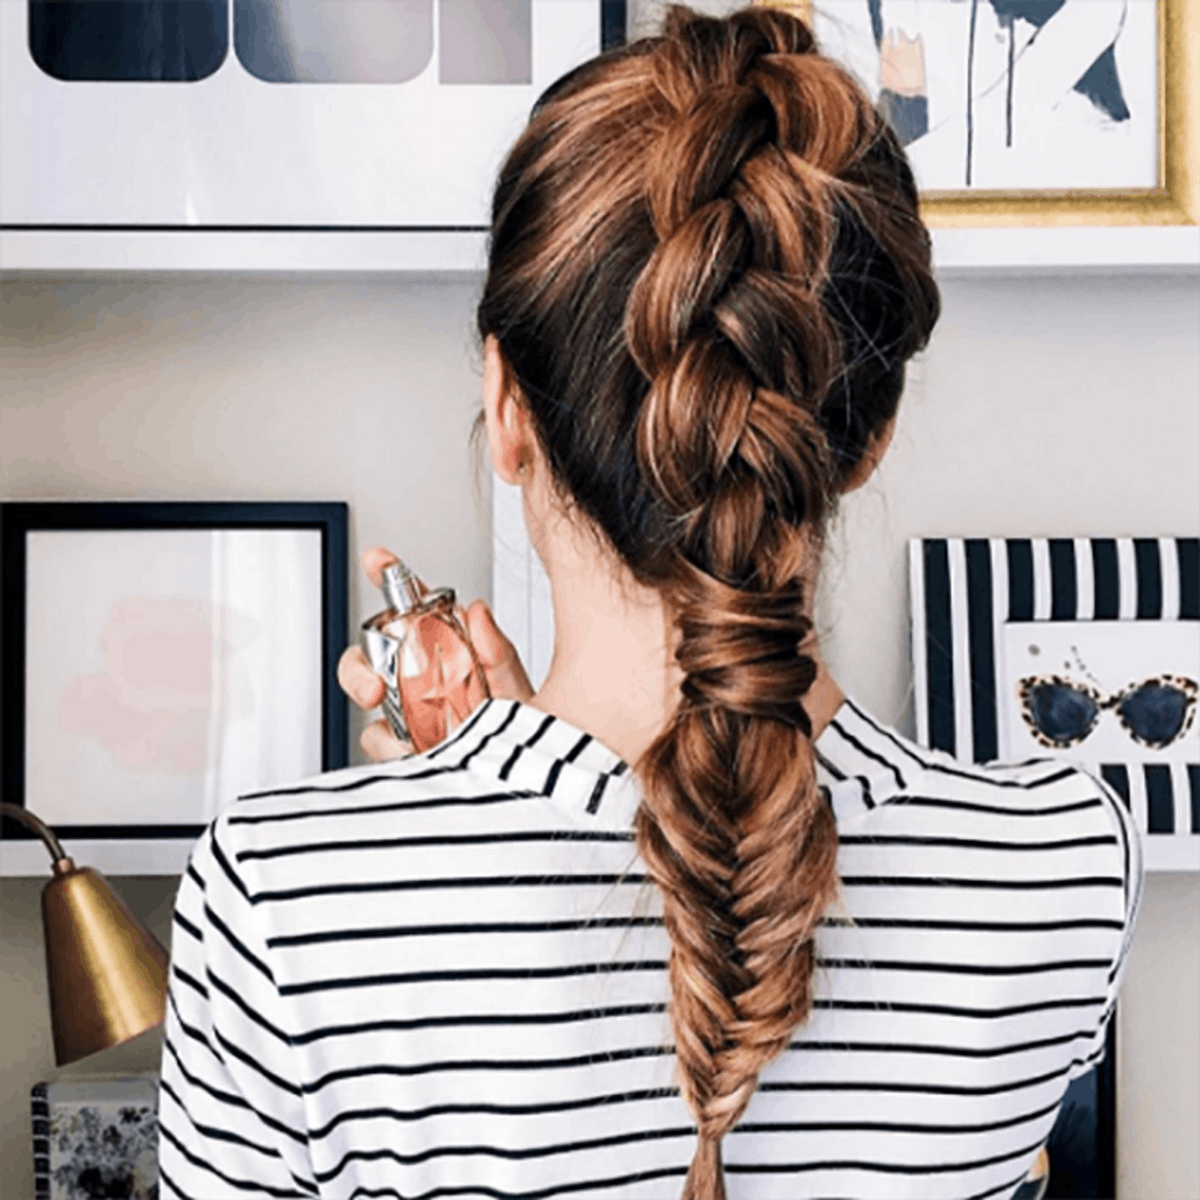 These Are All the Braids You Need to Know, According to Instagram